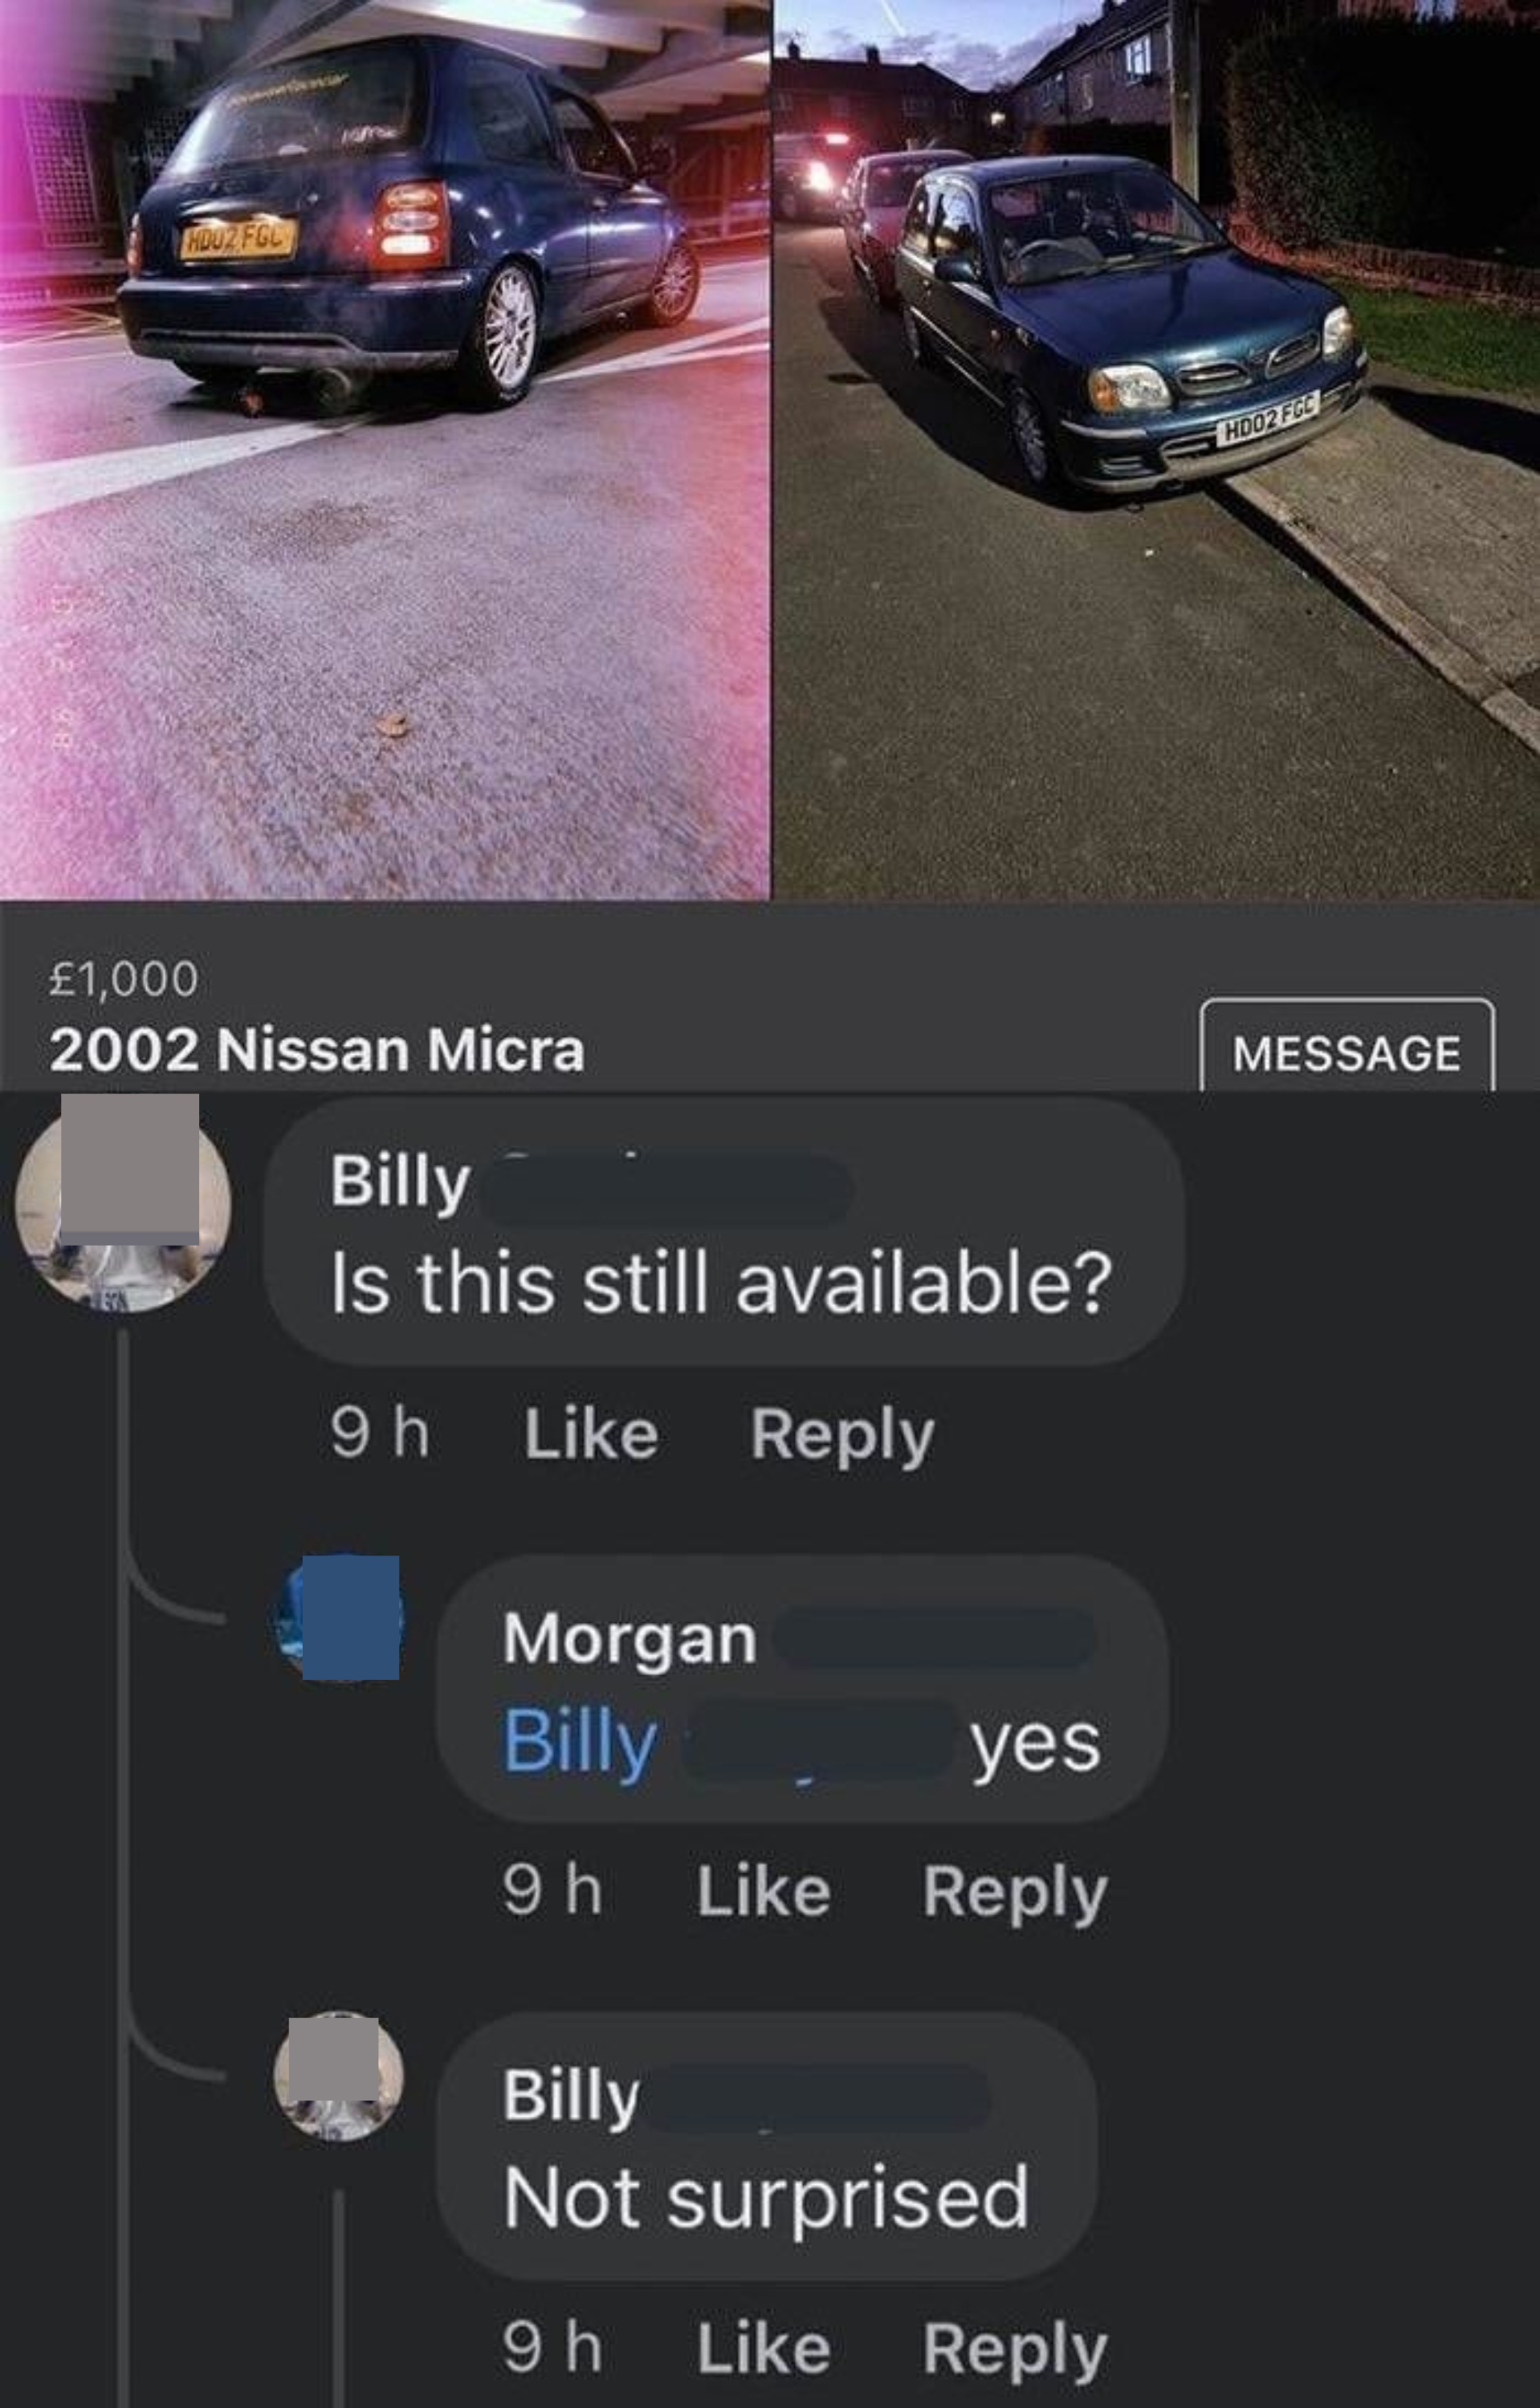 Person selling a 2002 Nissan Micra for 1,000 pounds, and when they answer &quot;Yes&quot; to question of whether it&#x27;s still available, person responds, &quot;Not surprised&quot;